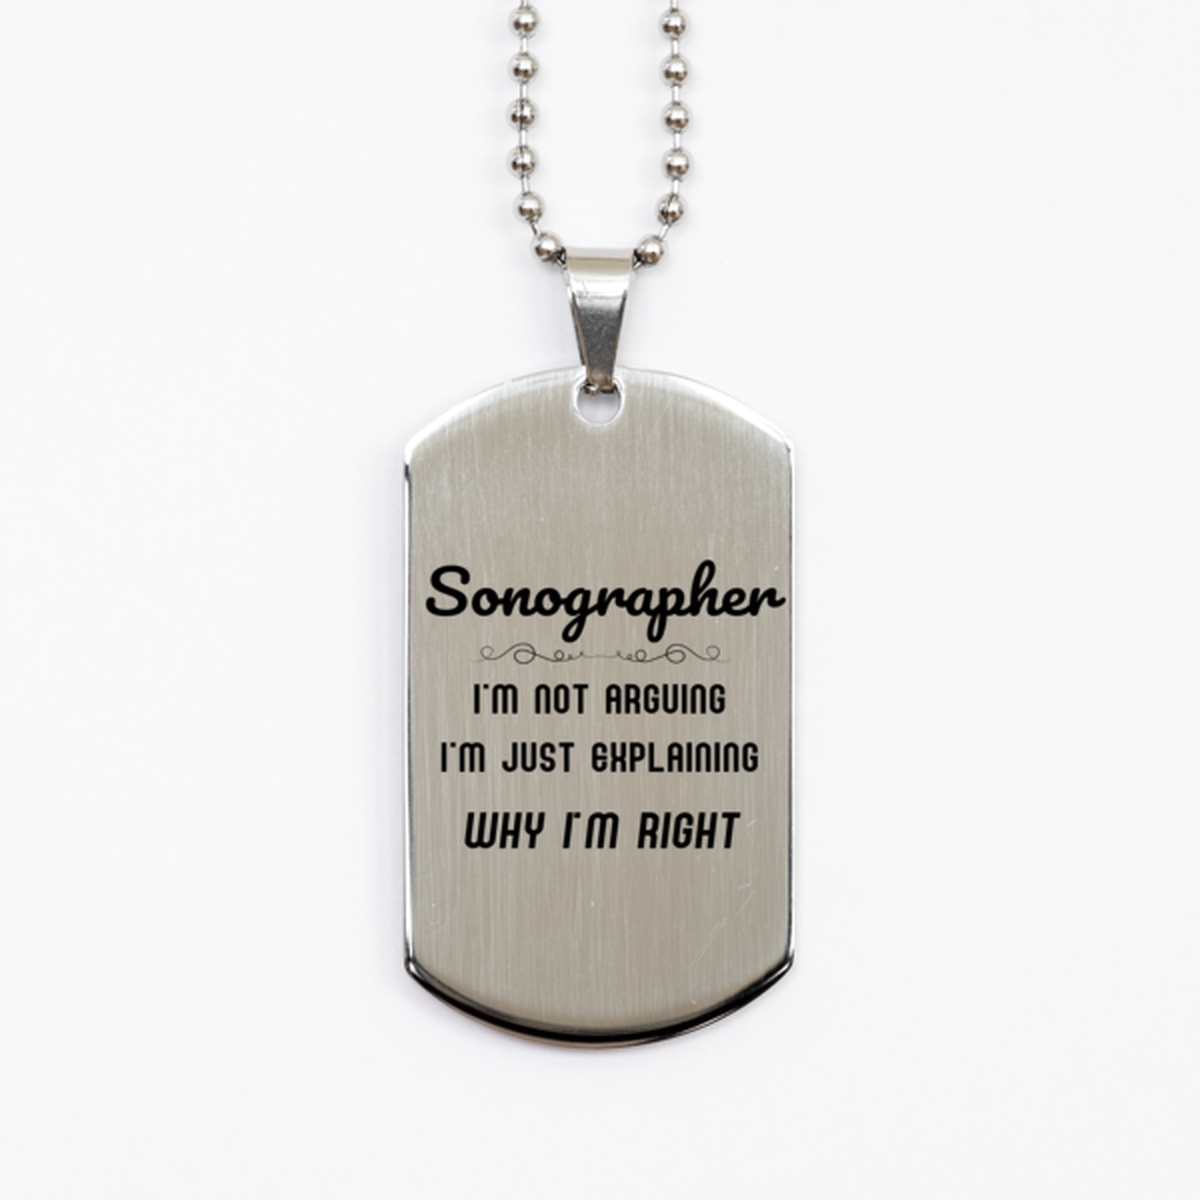 Sonographer I'm not Arguing. I'm Just Explaining Why I'm RIGHT Silver Dog Tag, Funny Saying Quote Sonographer Gifts For Sonographer Graduation Birthday Christmas Gifts for Men Women Coworker